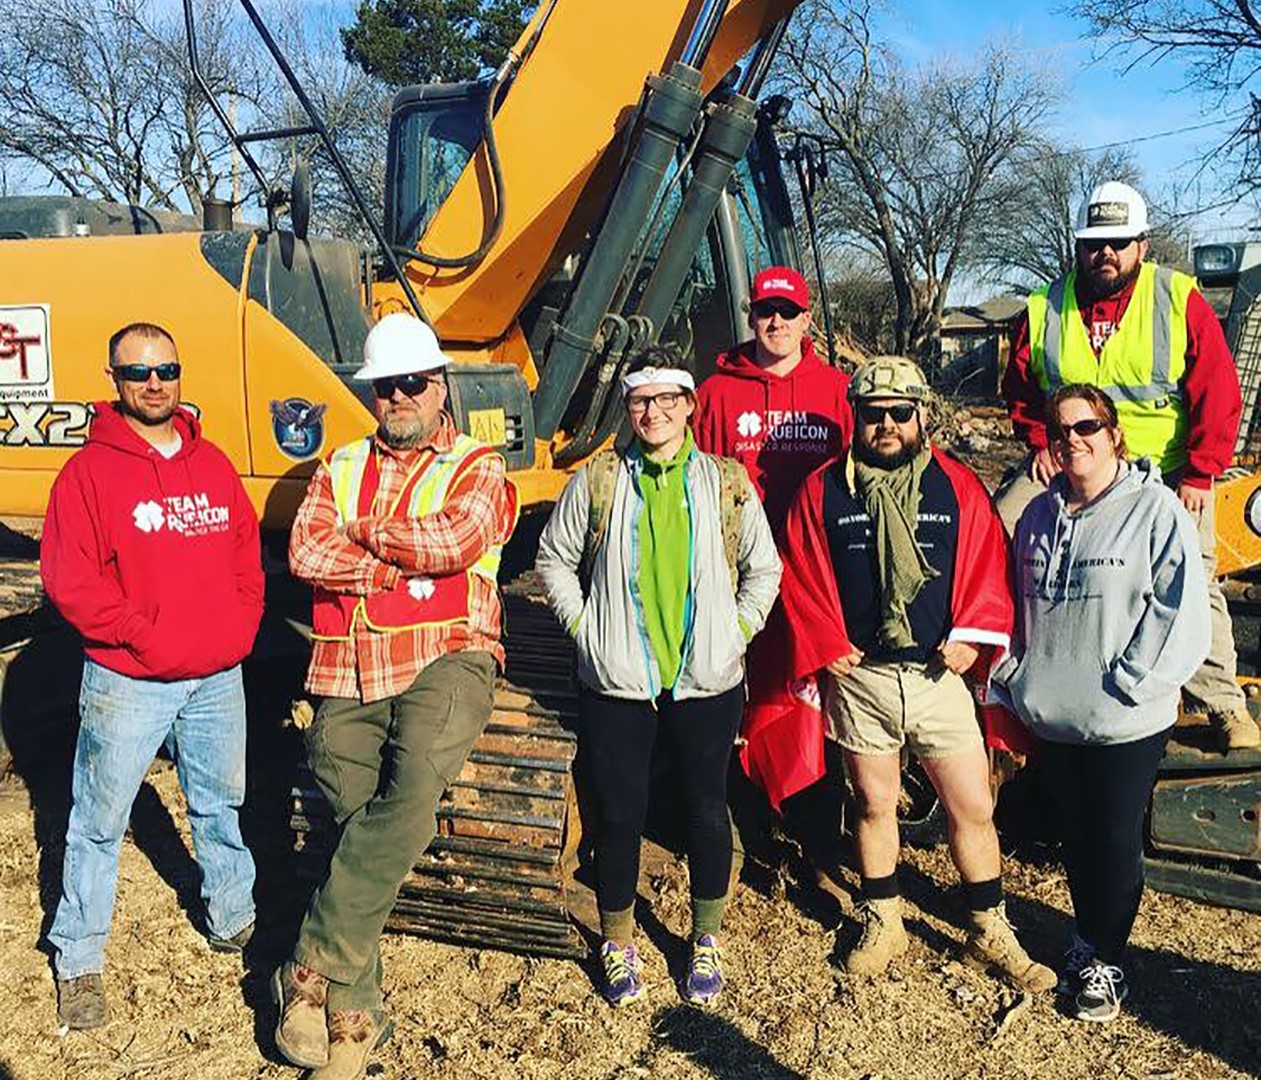 CASE Construction Equipment dealer OCT Equipment donated the use of a compact track loader and excavator to Team Rubicon